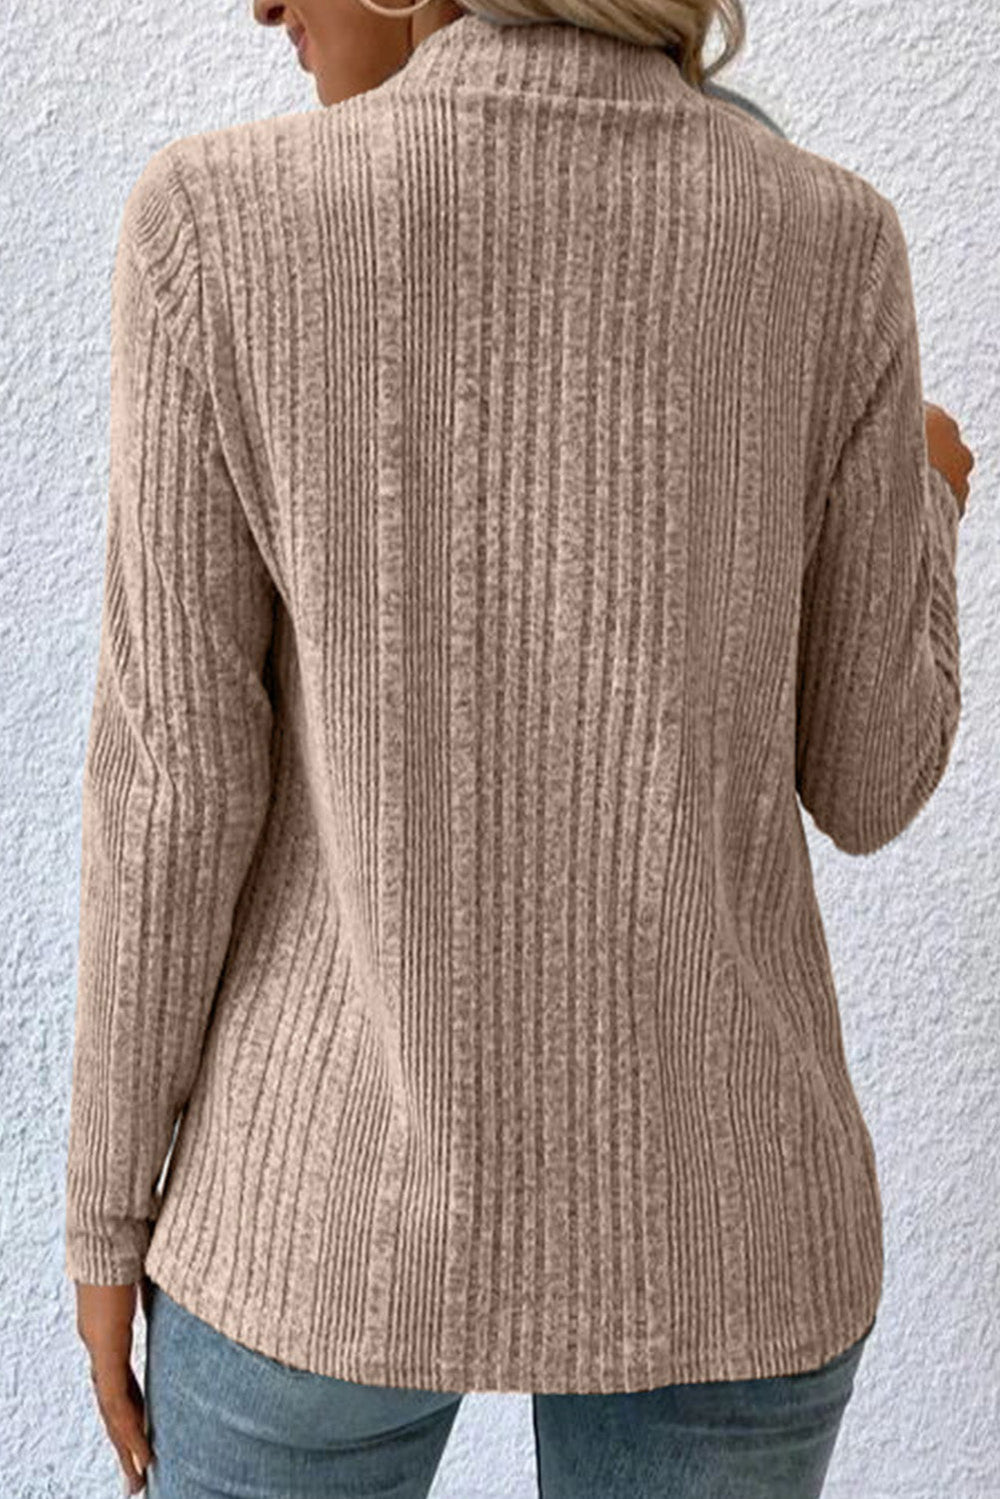 Smoked Gray Asymmetrical Ribbed Knit Cardigans